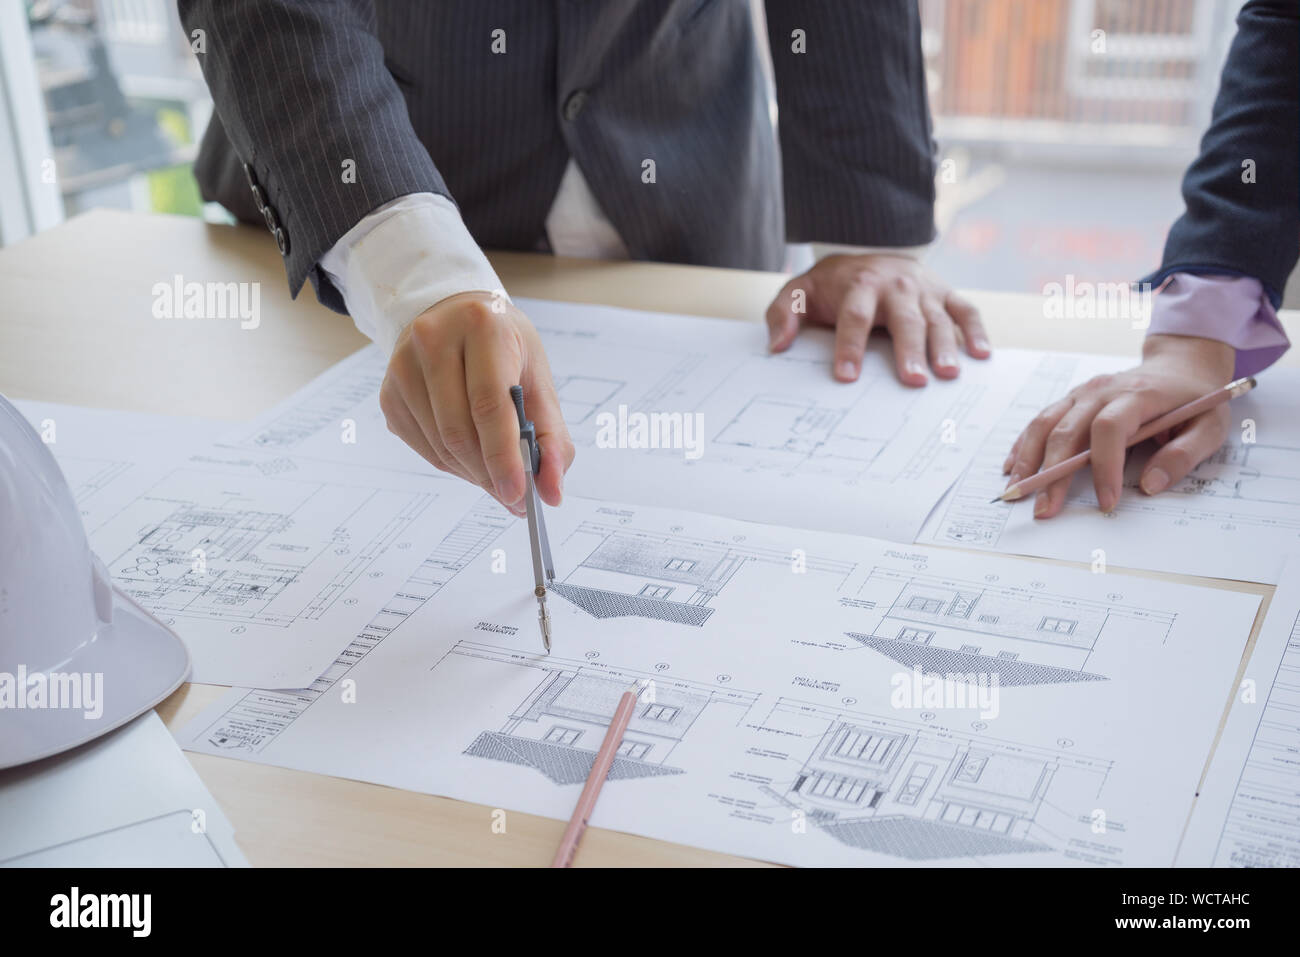 Close-up Architectures Discussing Over Blueprint At Desk In Office Stock Photo